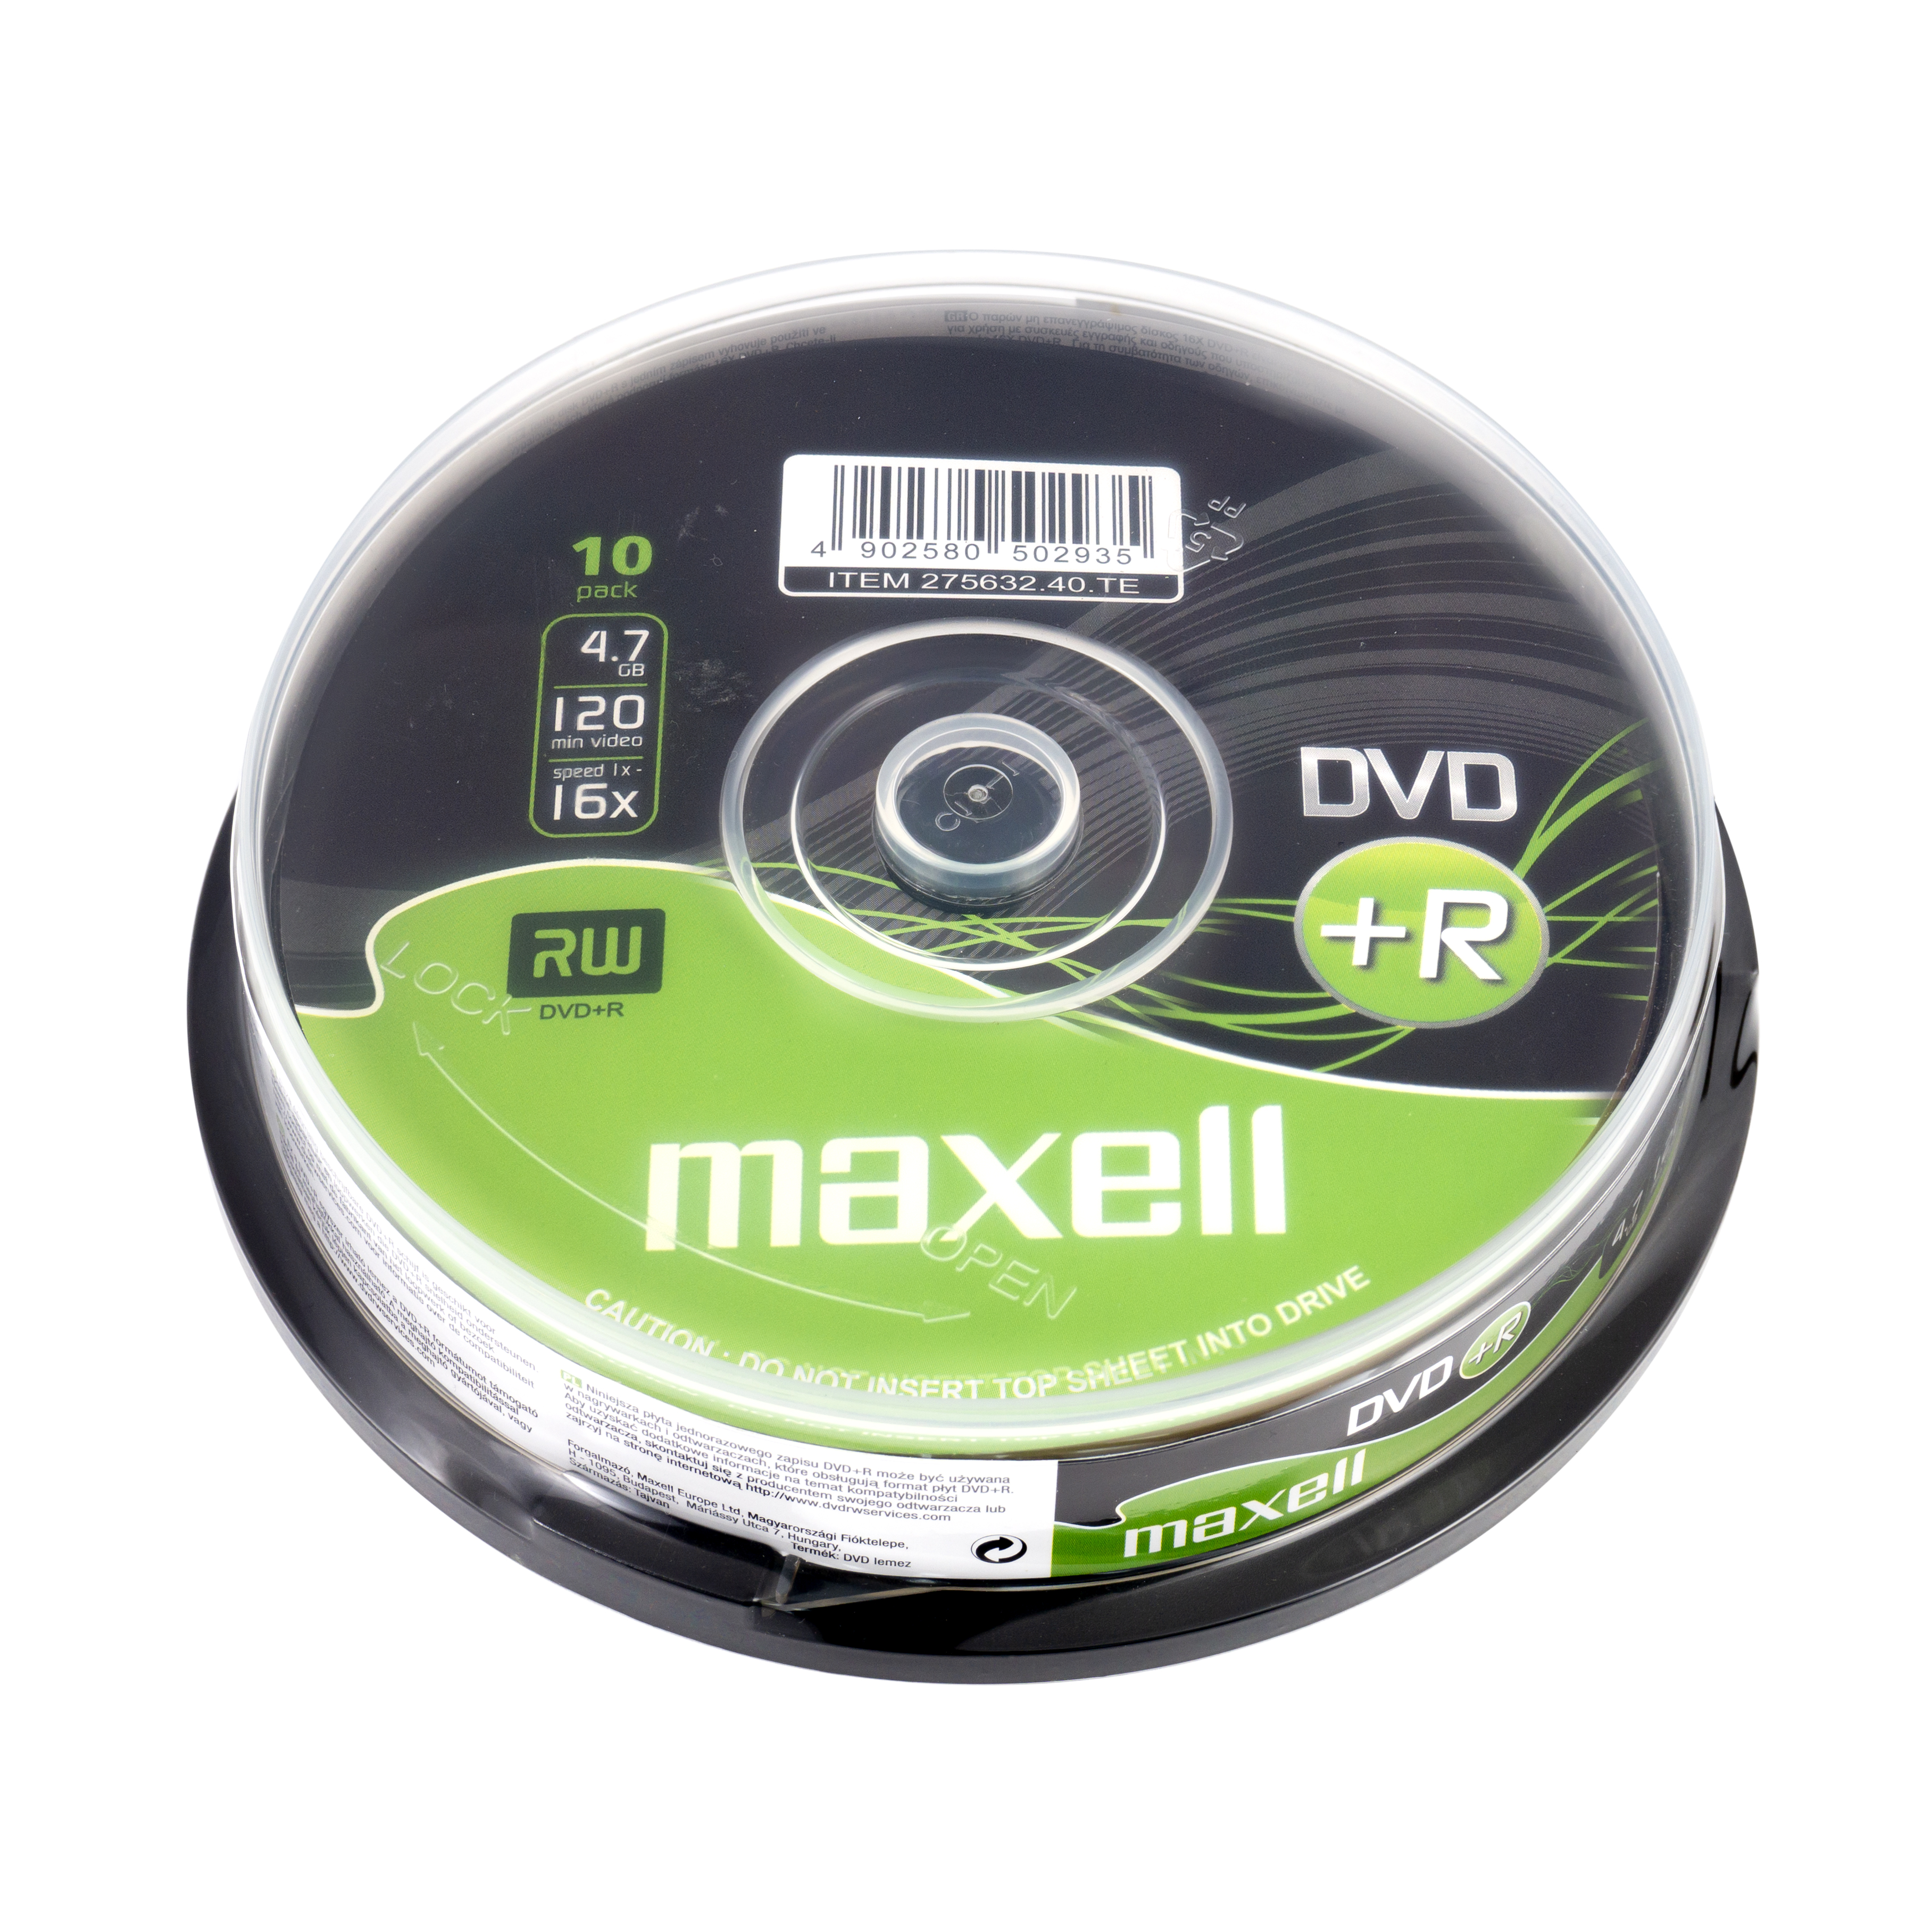 DVD+R 47 10 Pack Spindle - Maxell